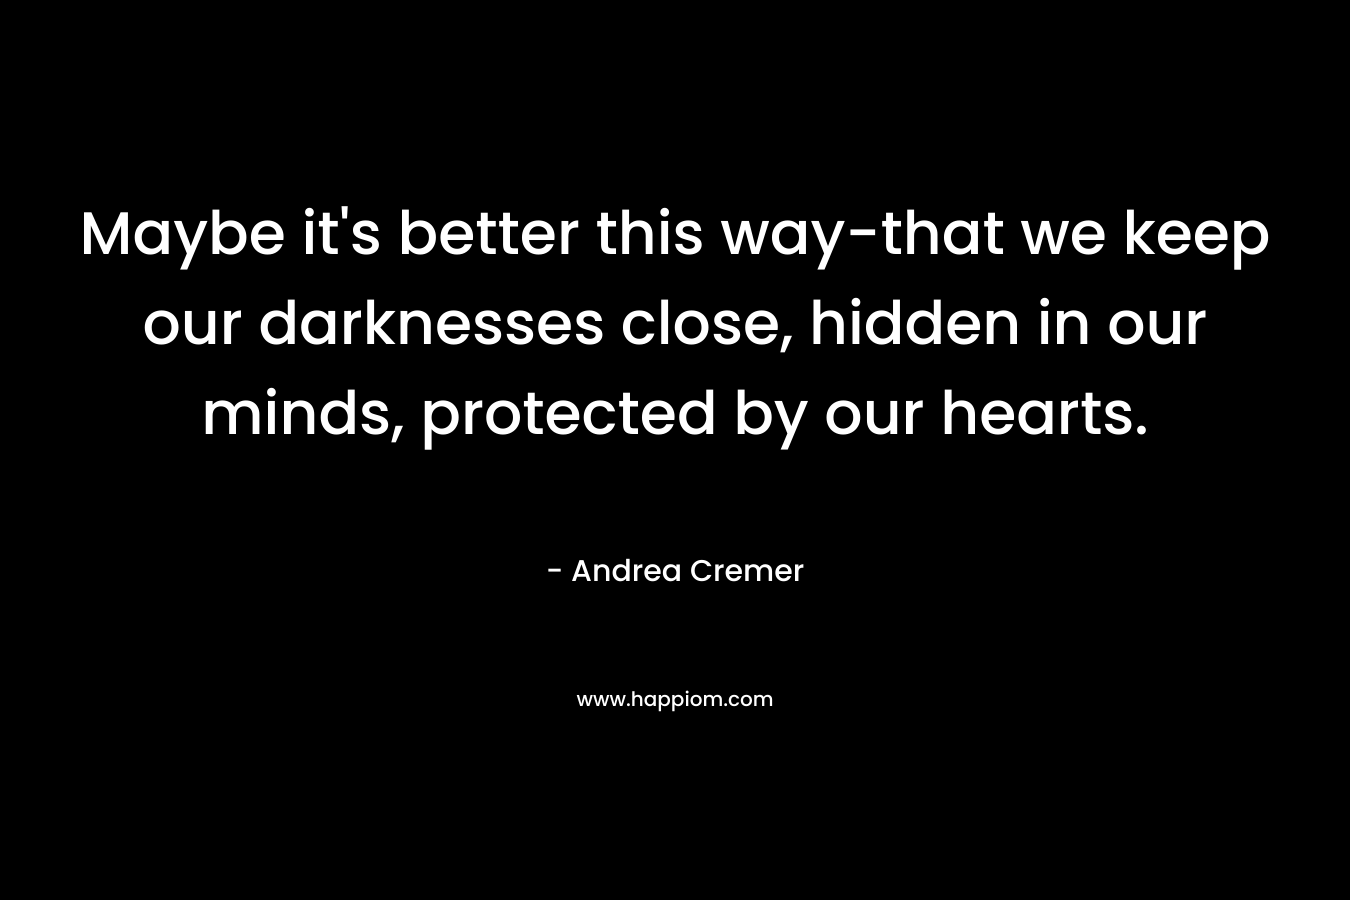 Maybe it's better this way-that we keep our darknesses close, hidden in our minds, protected by our hearts.